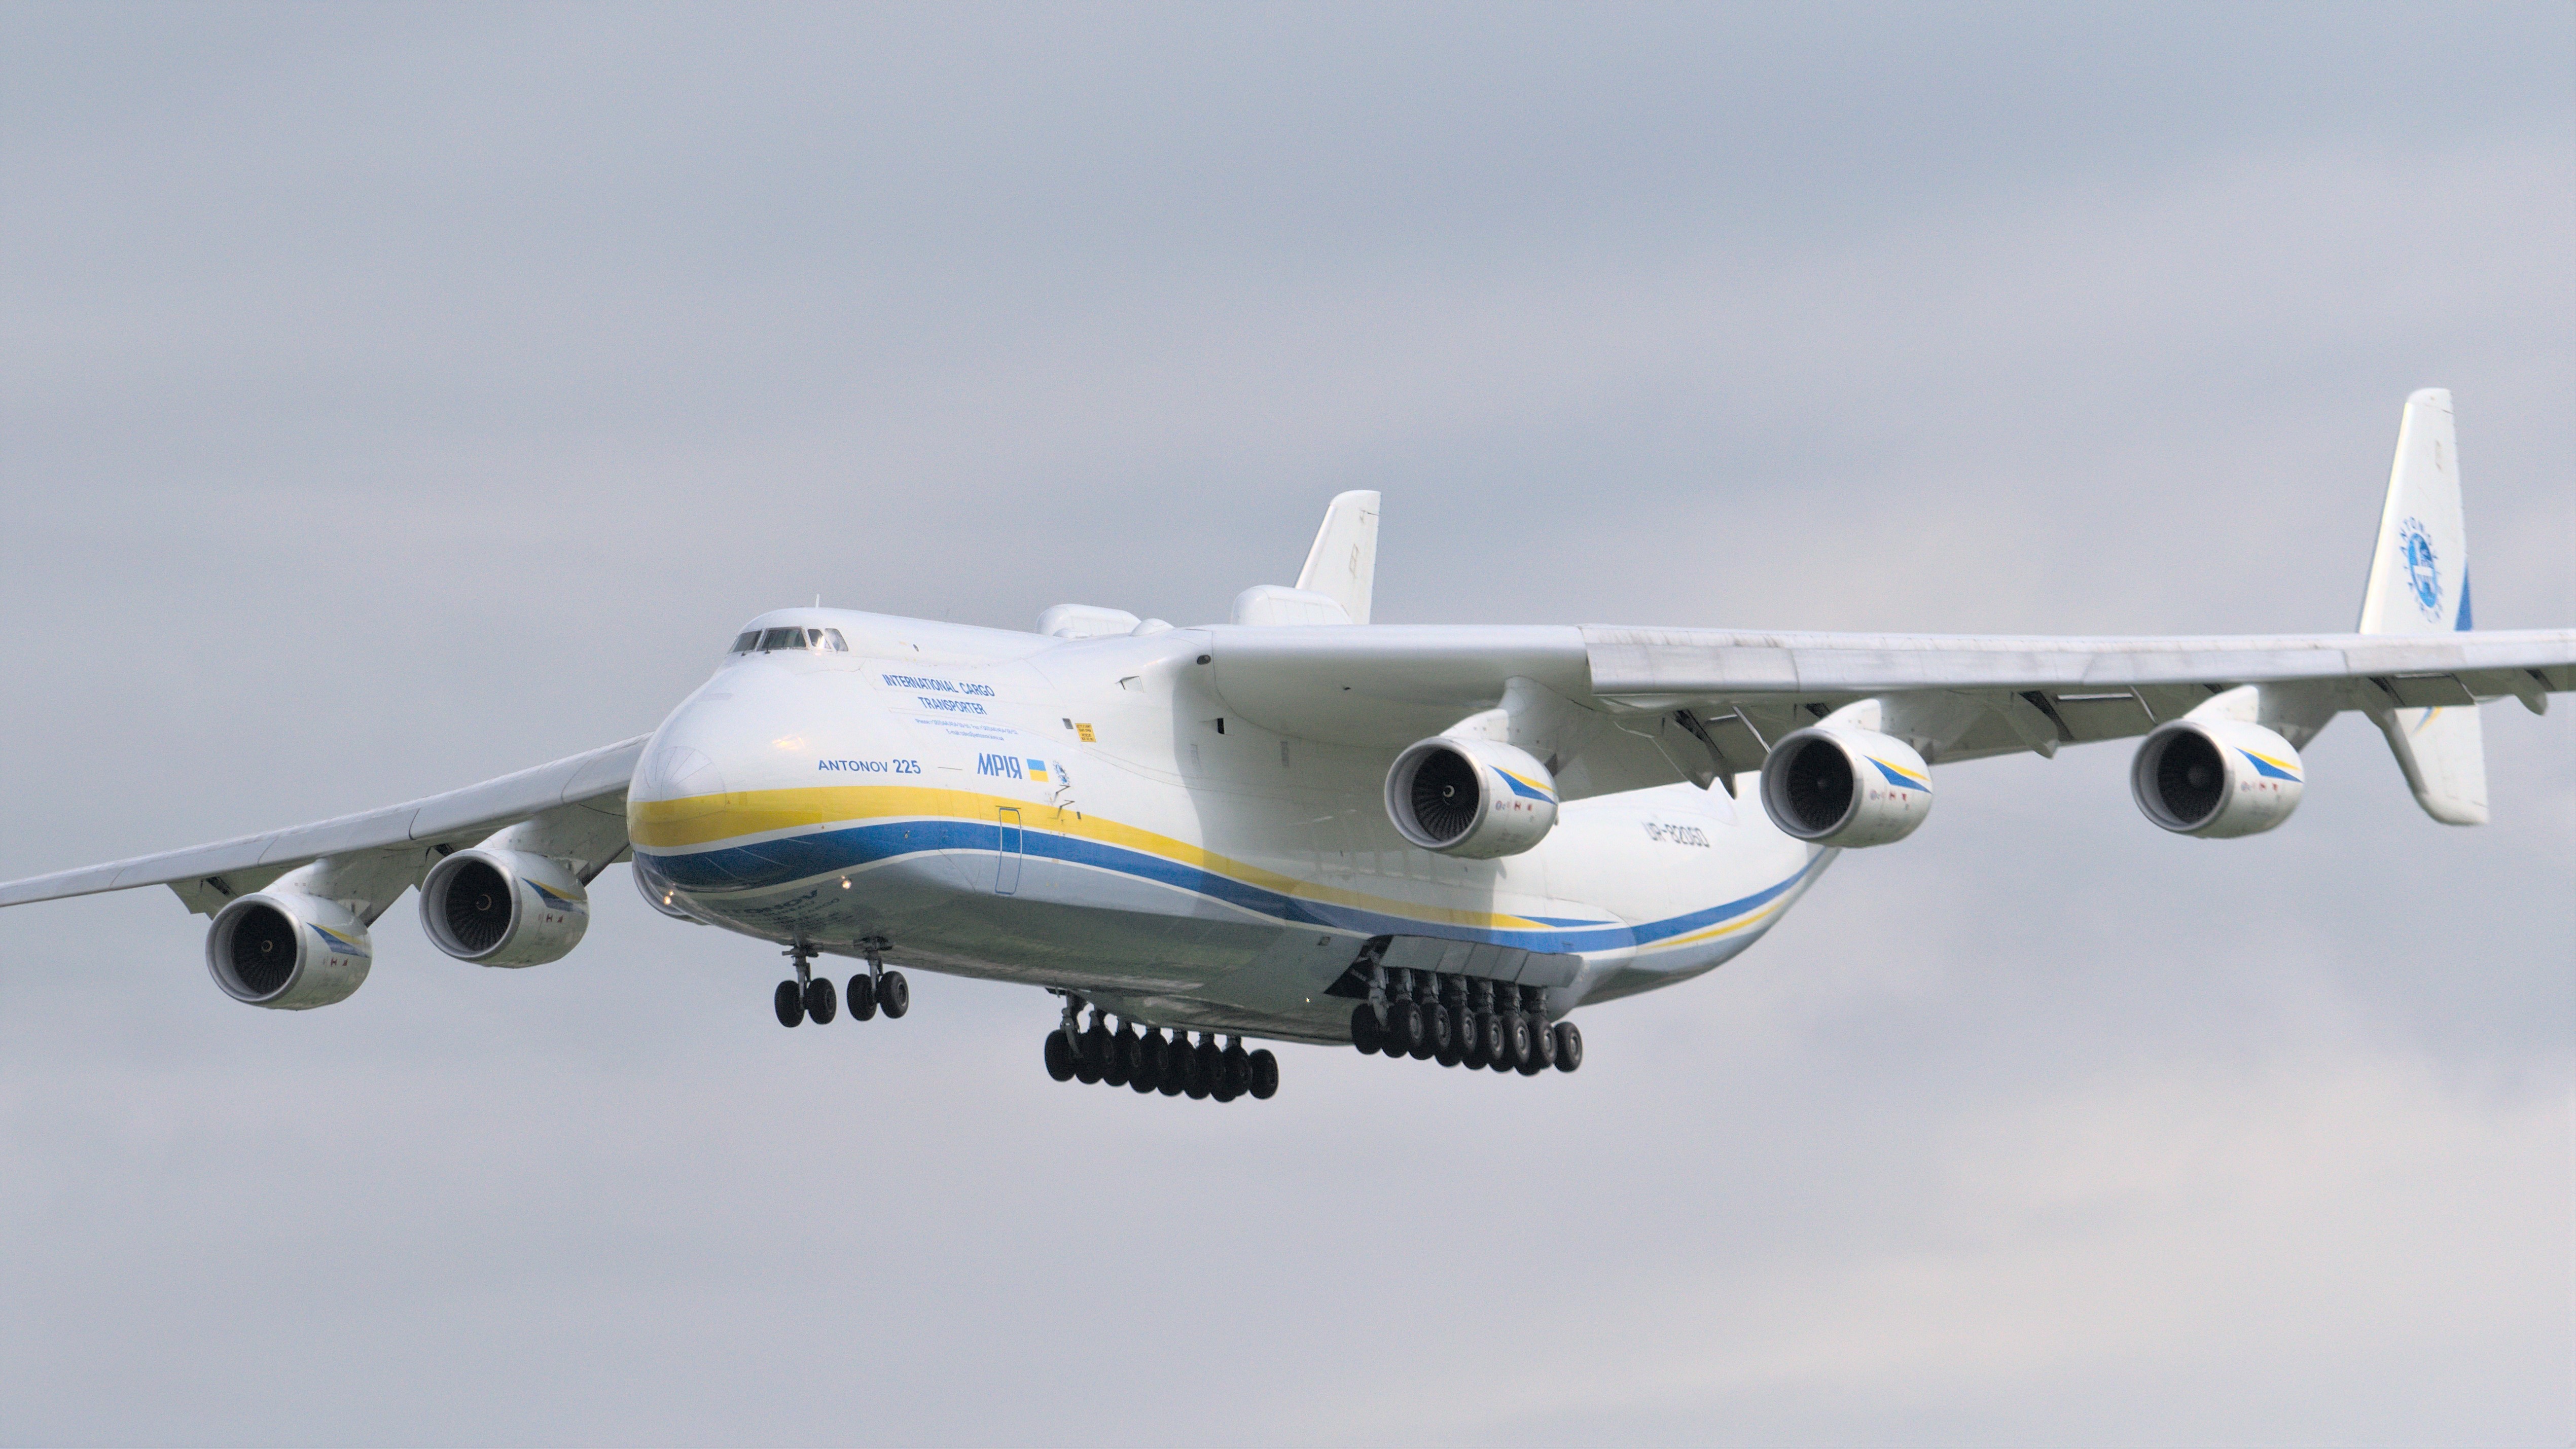 A massive twin-tailed cargo jet with large number of wheels comes in for landing.